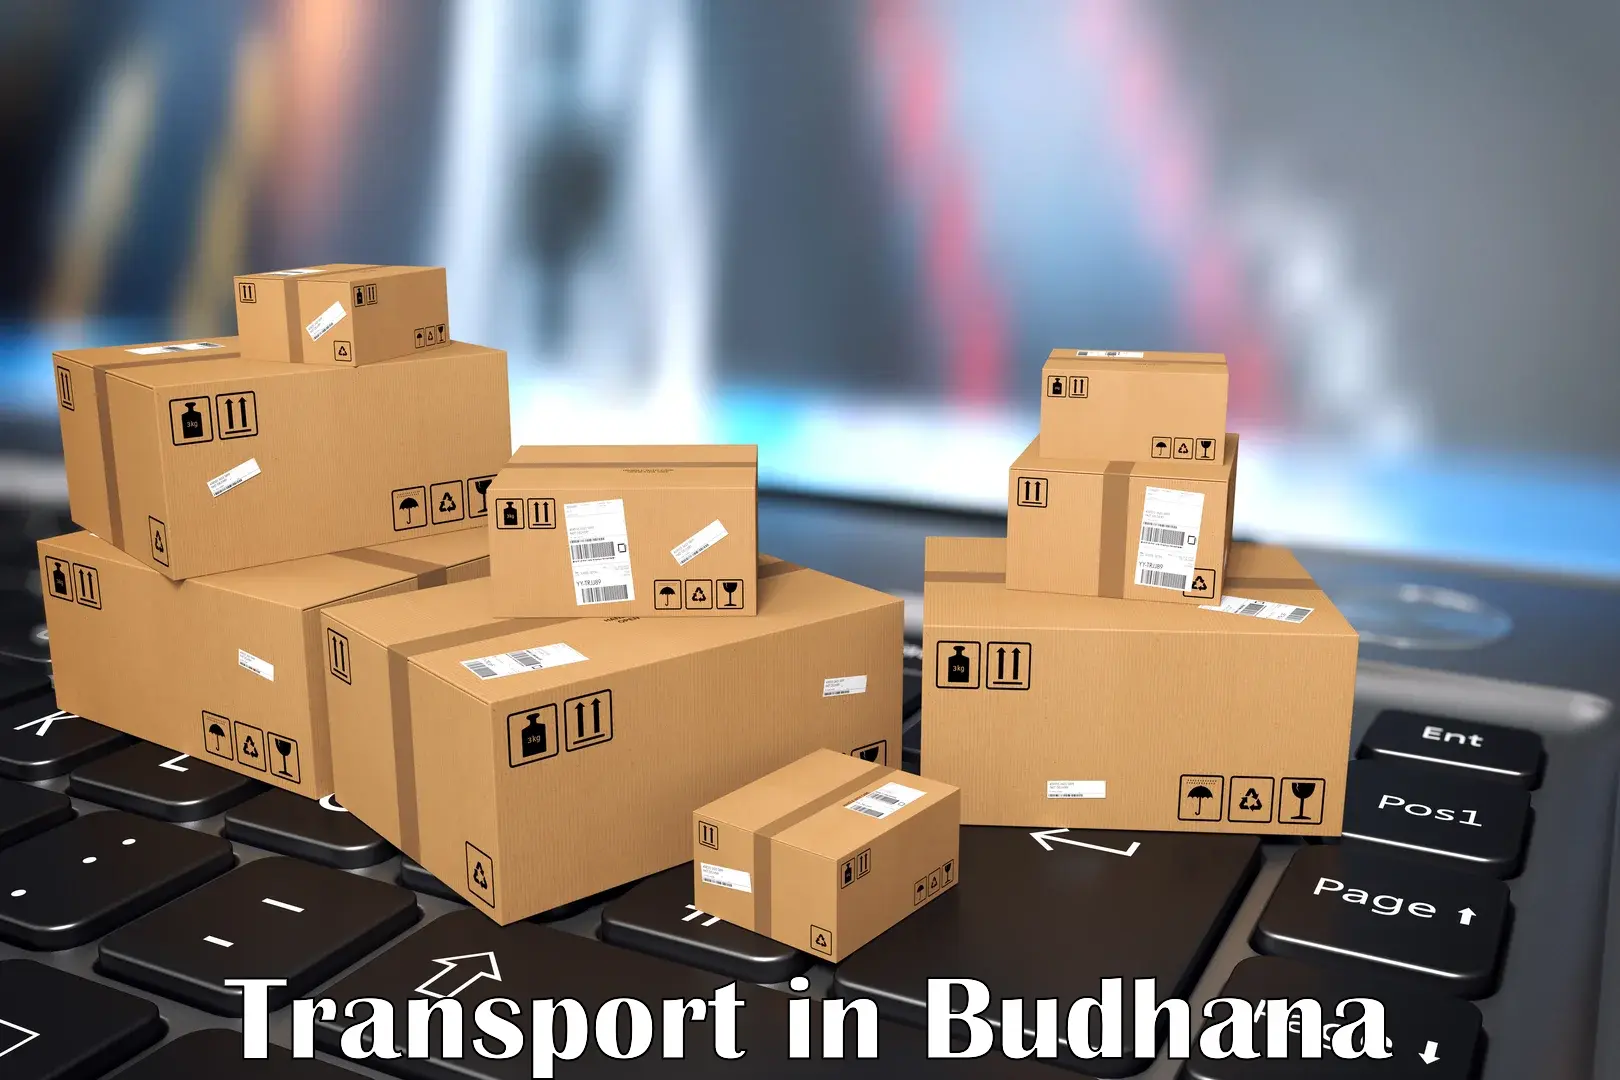 Container transportation services in Budhana